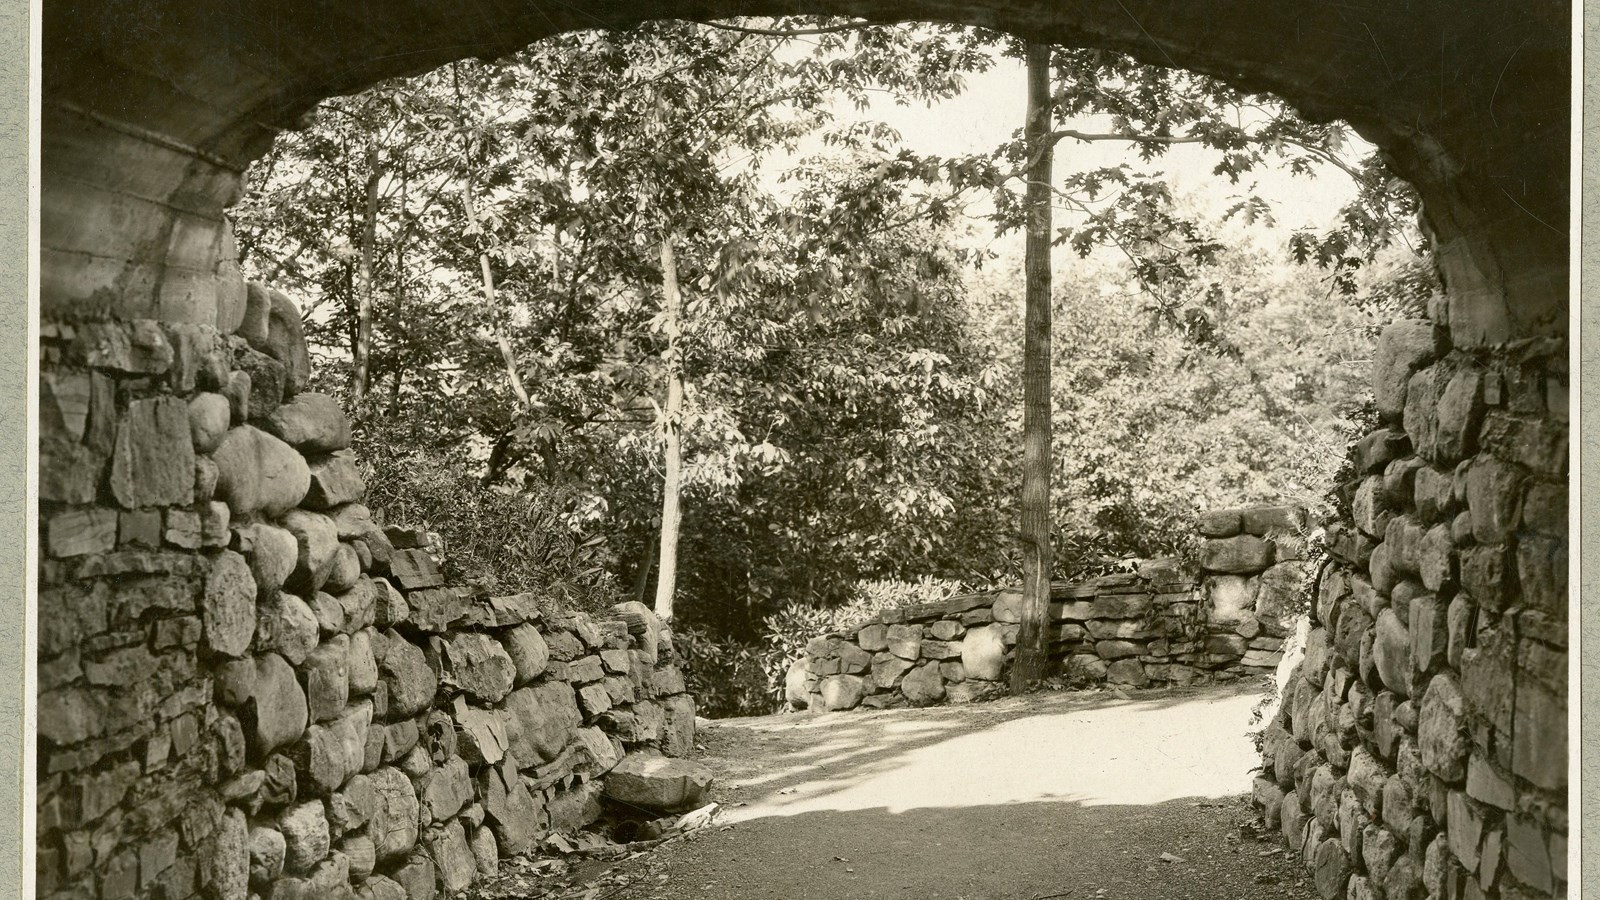 Black and white underneath stone bridge looking at stone wall and trees